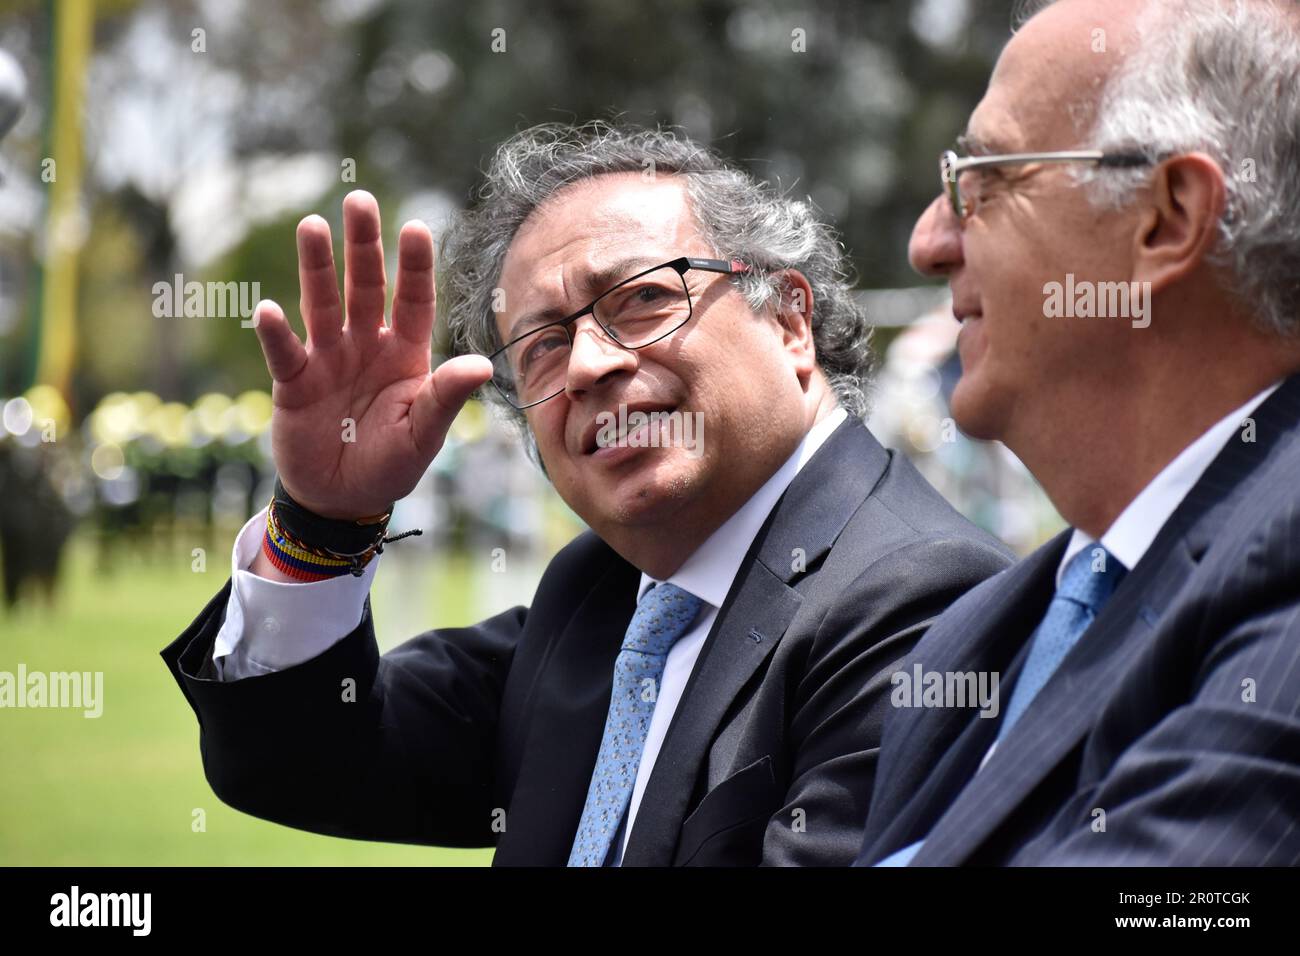 Bogota, Colombia. 09th May, 2023. Colombian president Gustavo Petro waves during the ceremony of the new Colombian Police Director William Rene Salamanca at the General Santander Police Academy in Bogota, Colombia. May 9, 2023. Photo By: Cristian Bayona/Long Visual Press Credit: Long Visual Press/Alamy Live News Stock Photo